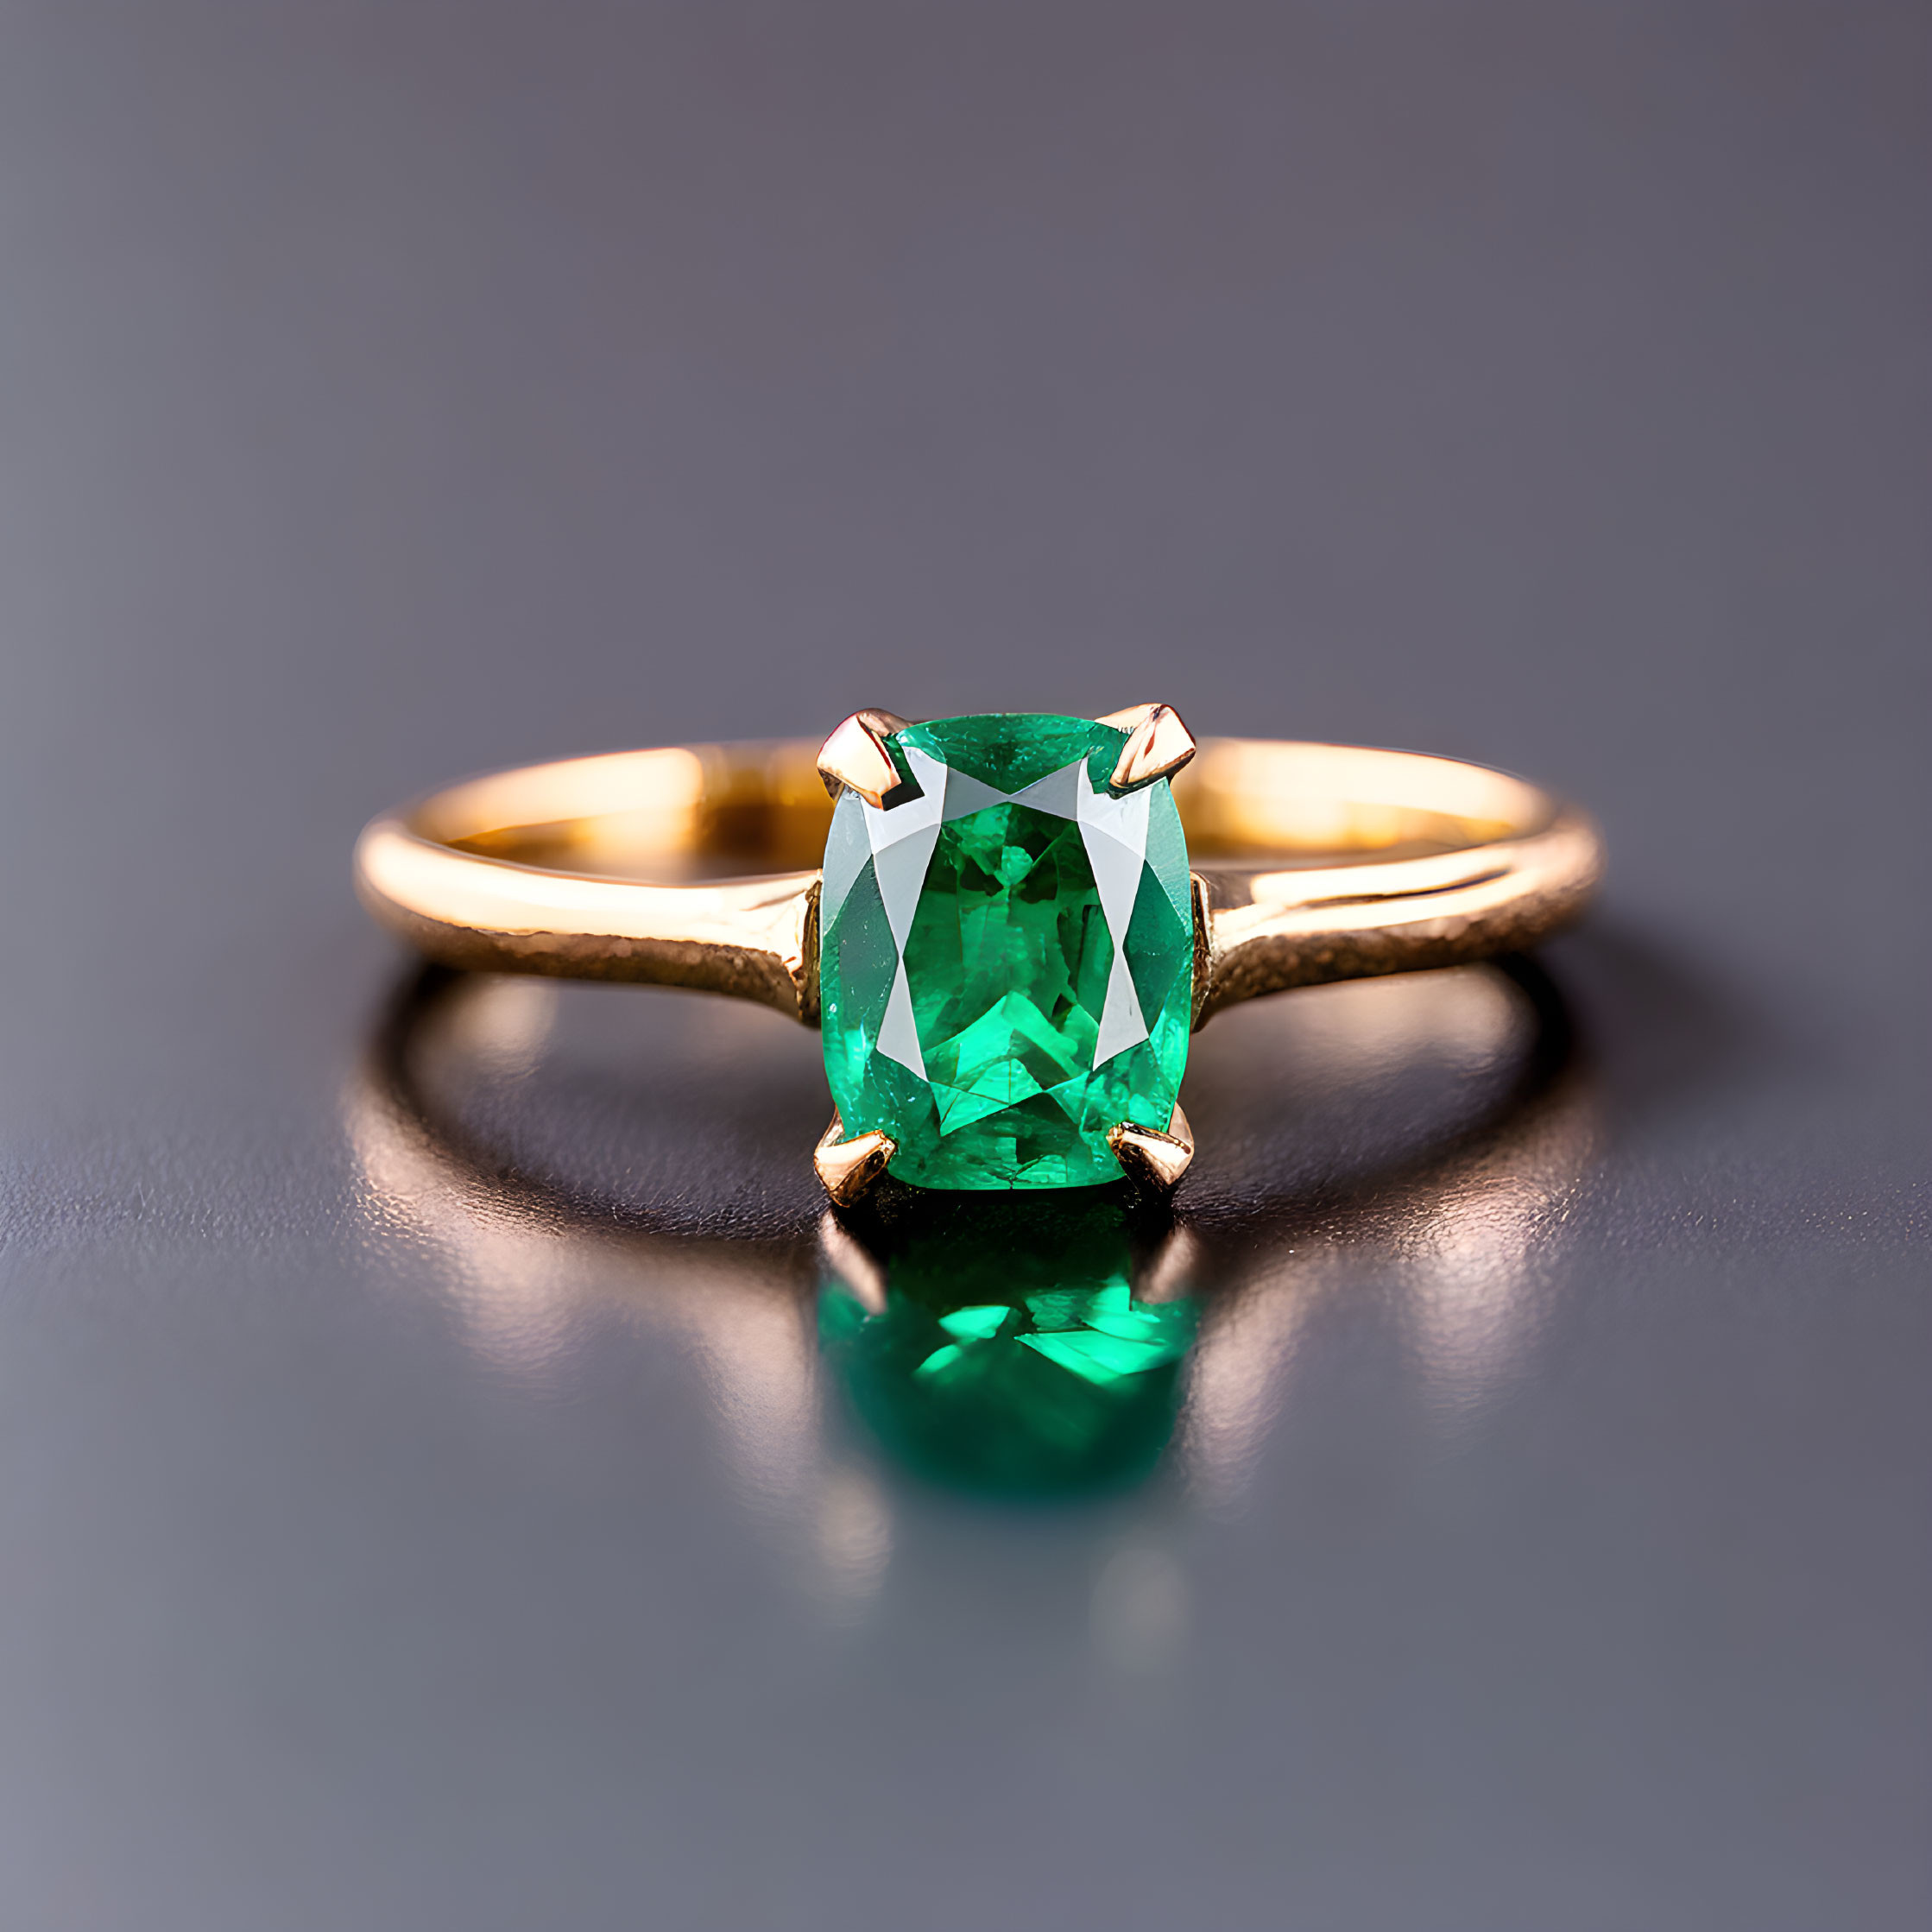 Gold Ring with Large Emerald-Cut Green Gemstone on Reflective Surface